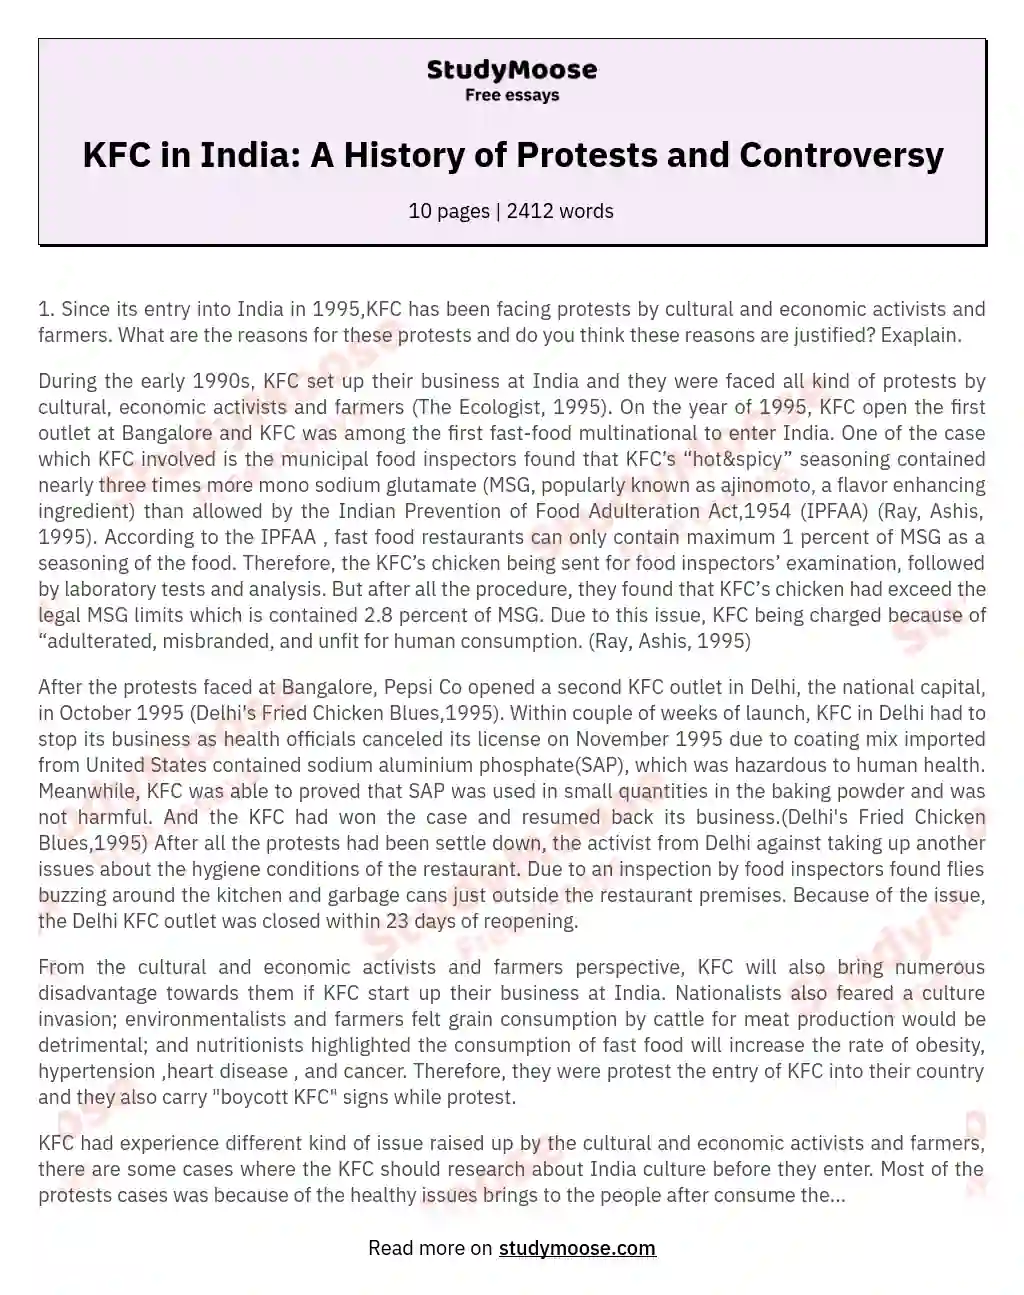 KFC in India: A History of Protests and Controversy essay